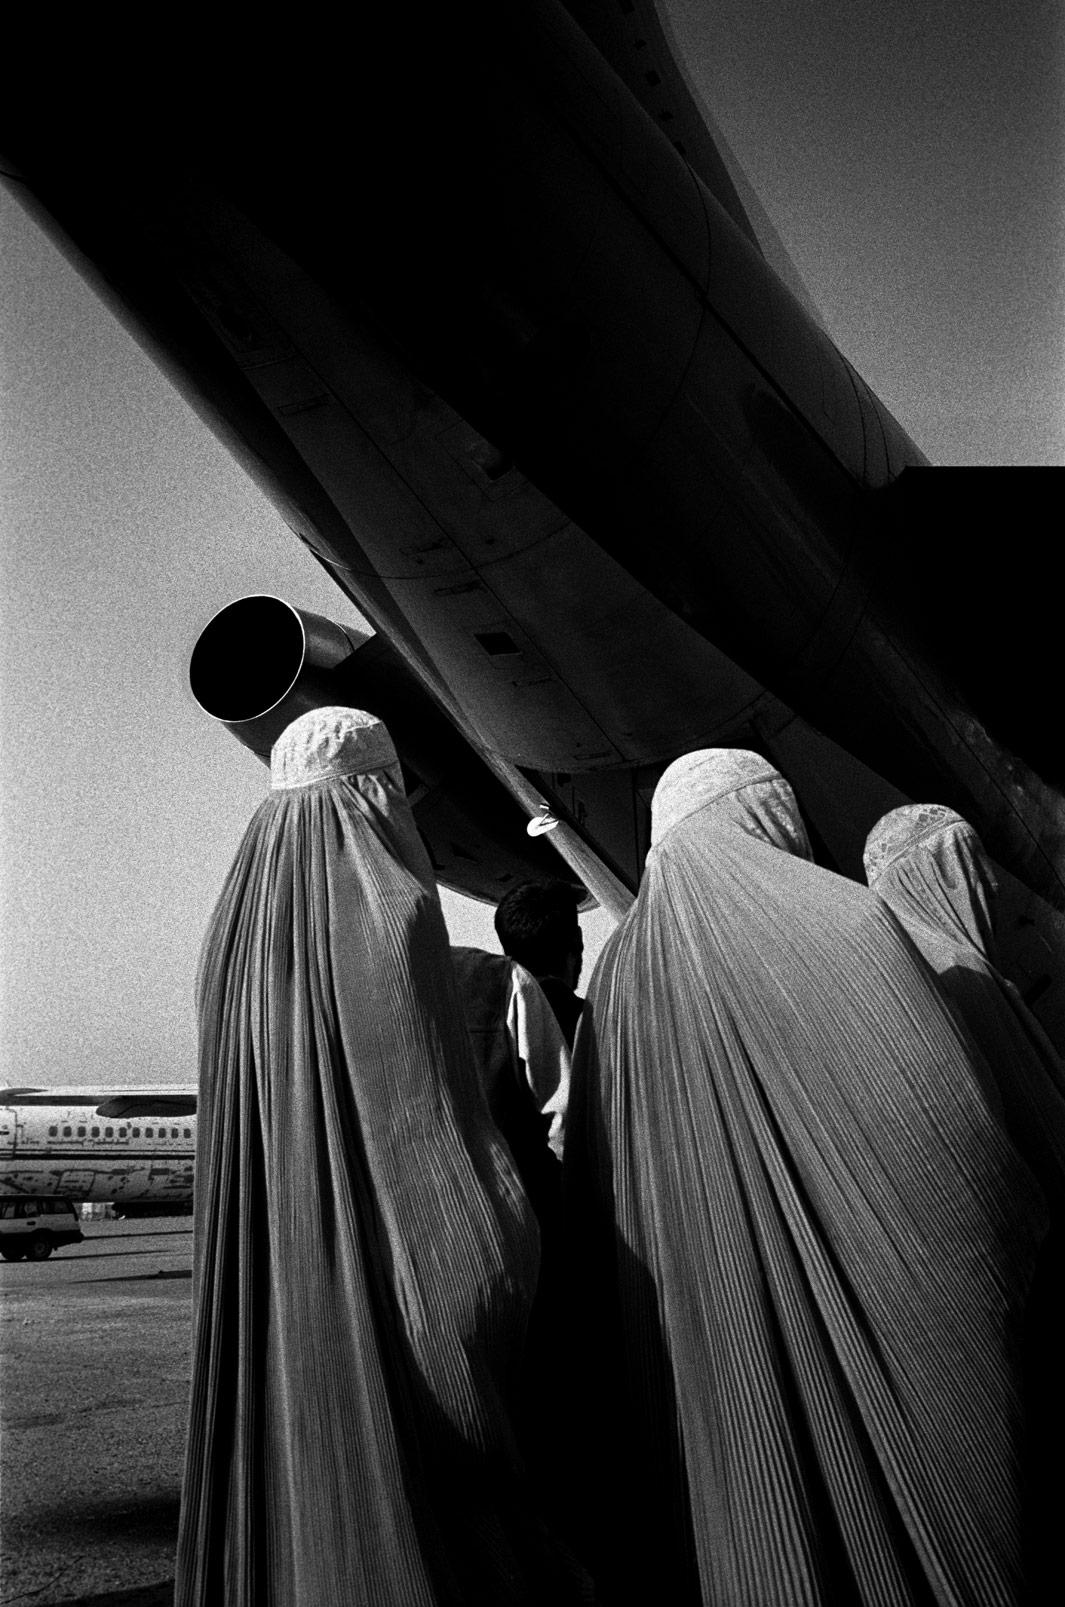 Kabul. Afghanistan. November 2002Women line up to board an Ariana Airlines flight at Kabul Airport